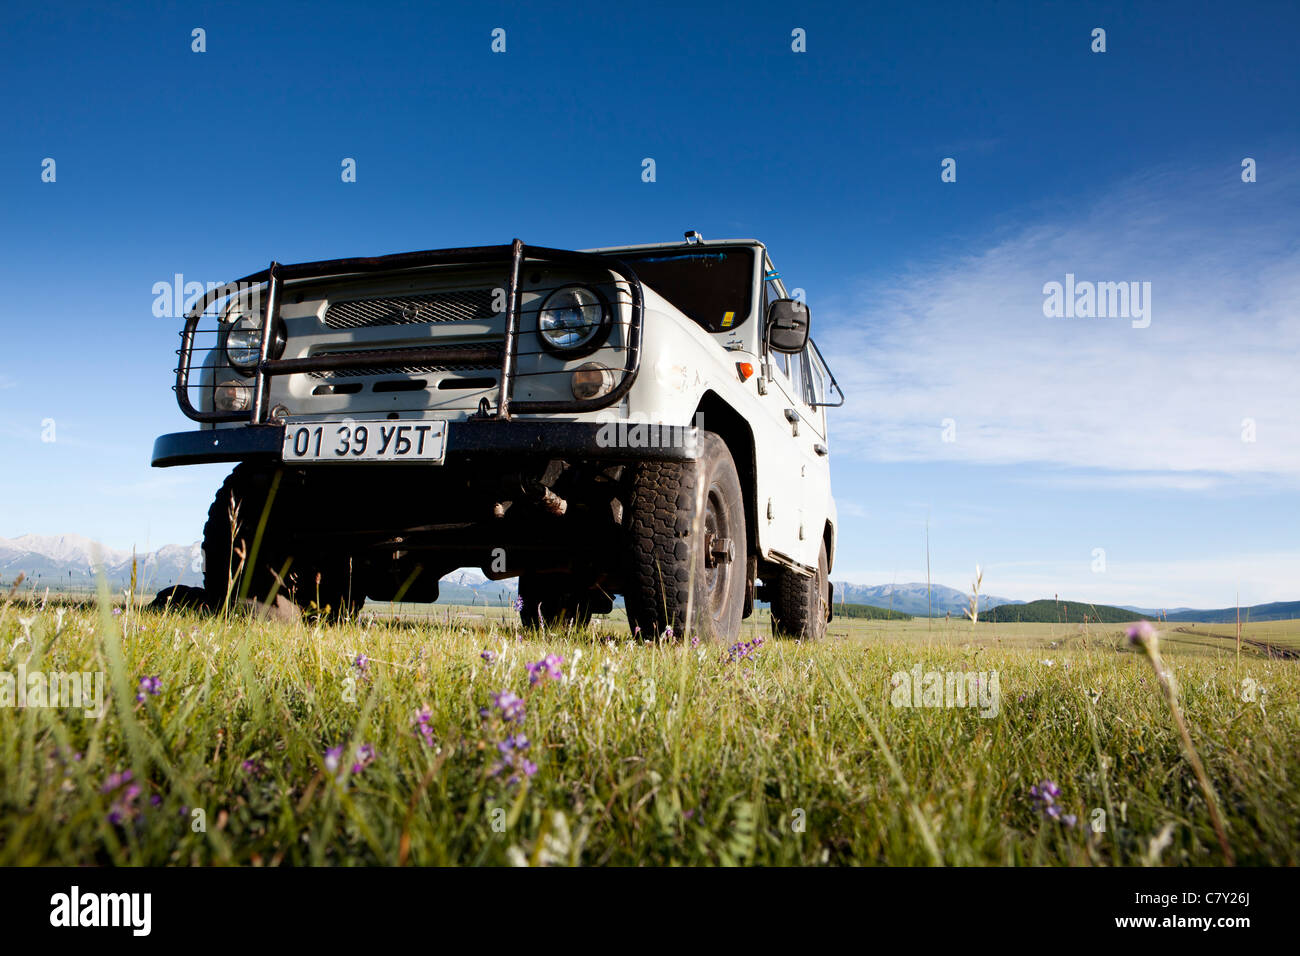 Russian jeep UAZ-469 in Mongolia on steppe, Mongolia Stock Photo